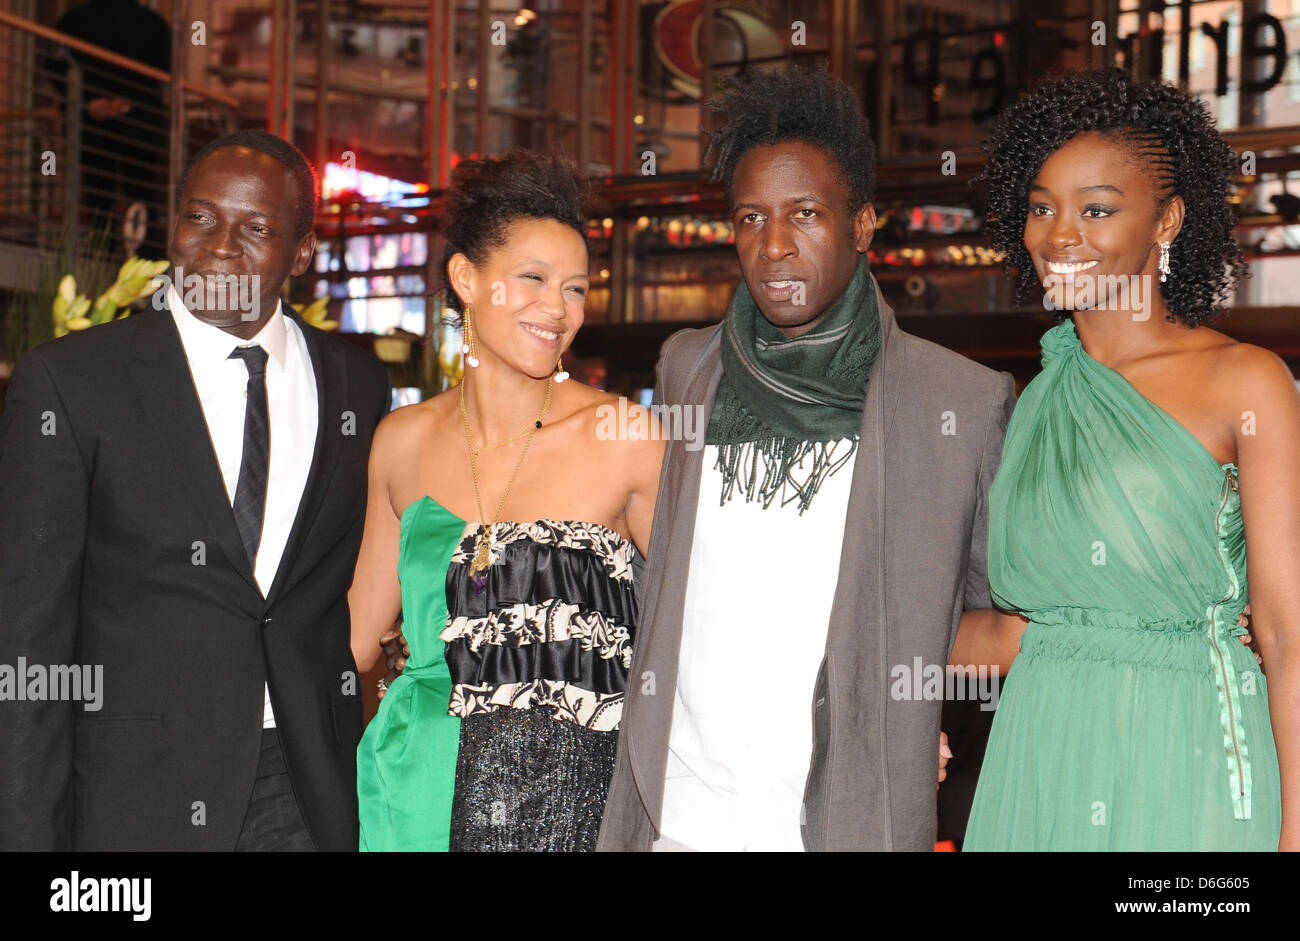 Actor Djolof M'bengue, actress Anisia Uzeyman (L-R), actor Saul Williams and actress Aissa Maiga arrive for the premiere of the movie 'Tey' (_Aujourd'hui_) during the 62nd Berlin International Film Festival, in Berlin, Germany, 10 February 2012. The movie is presented in competition at the 62nd Berlinale running from 09 to 19 February. Photo: Britta Pedersen dpa Stock Photo